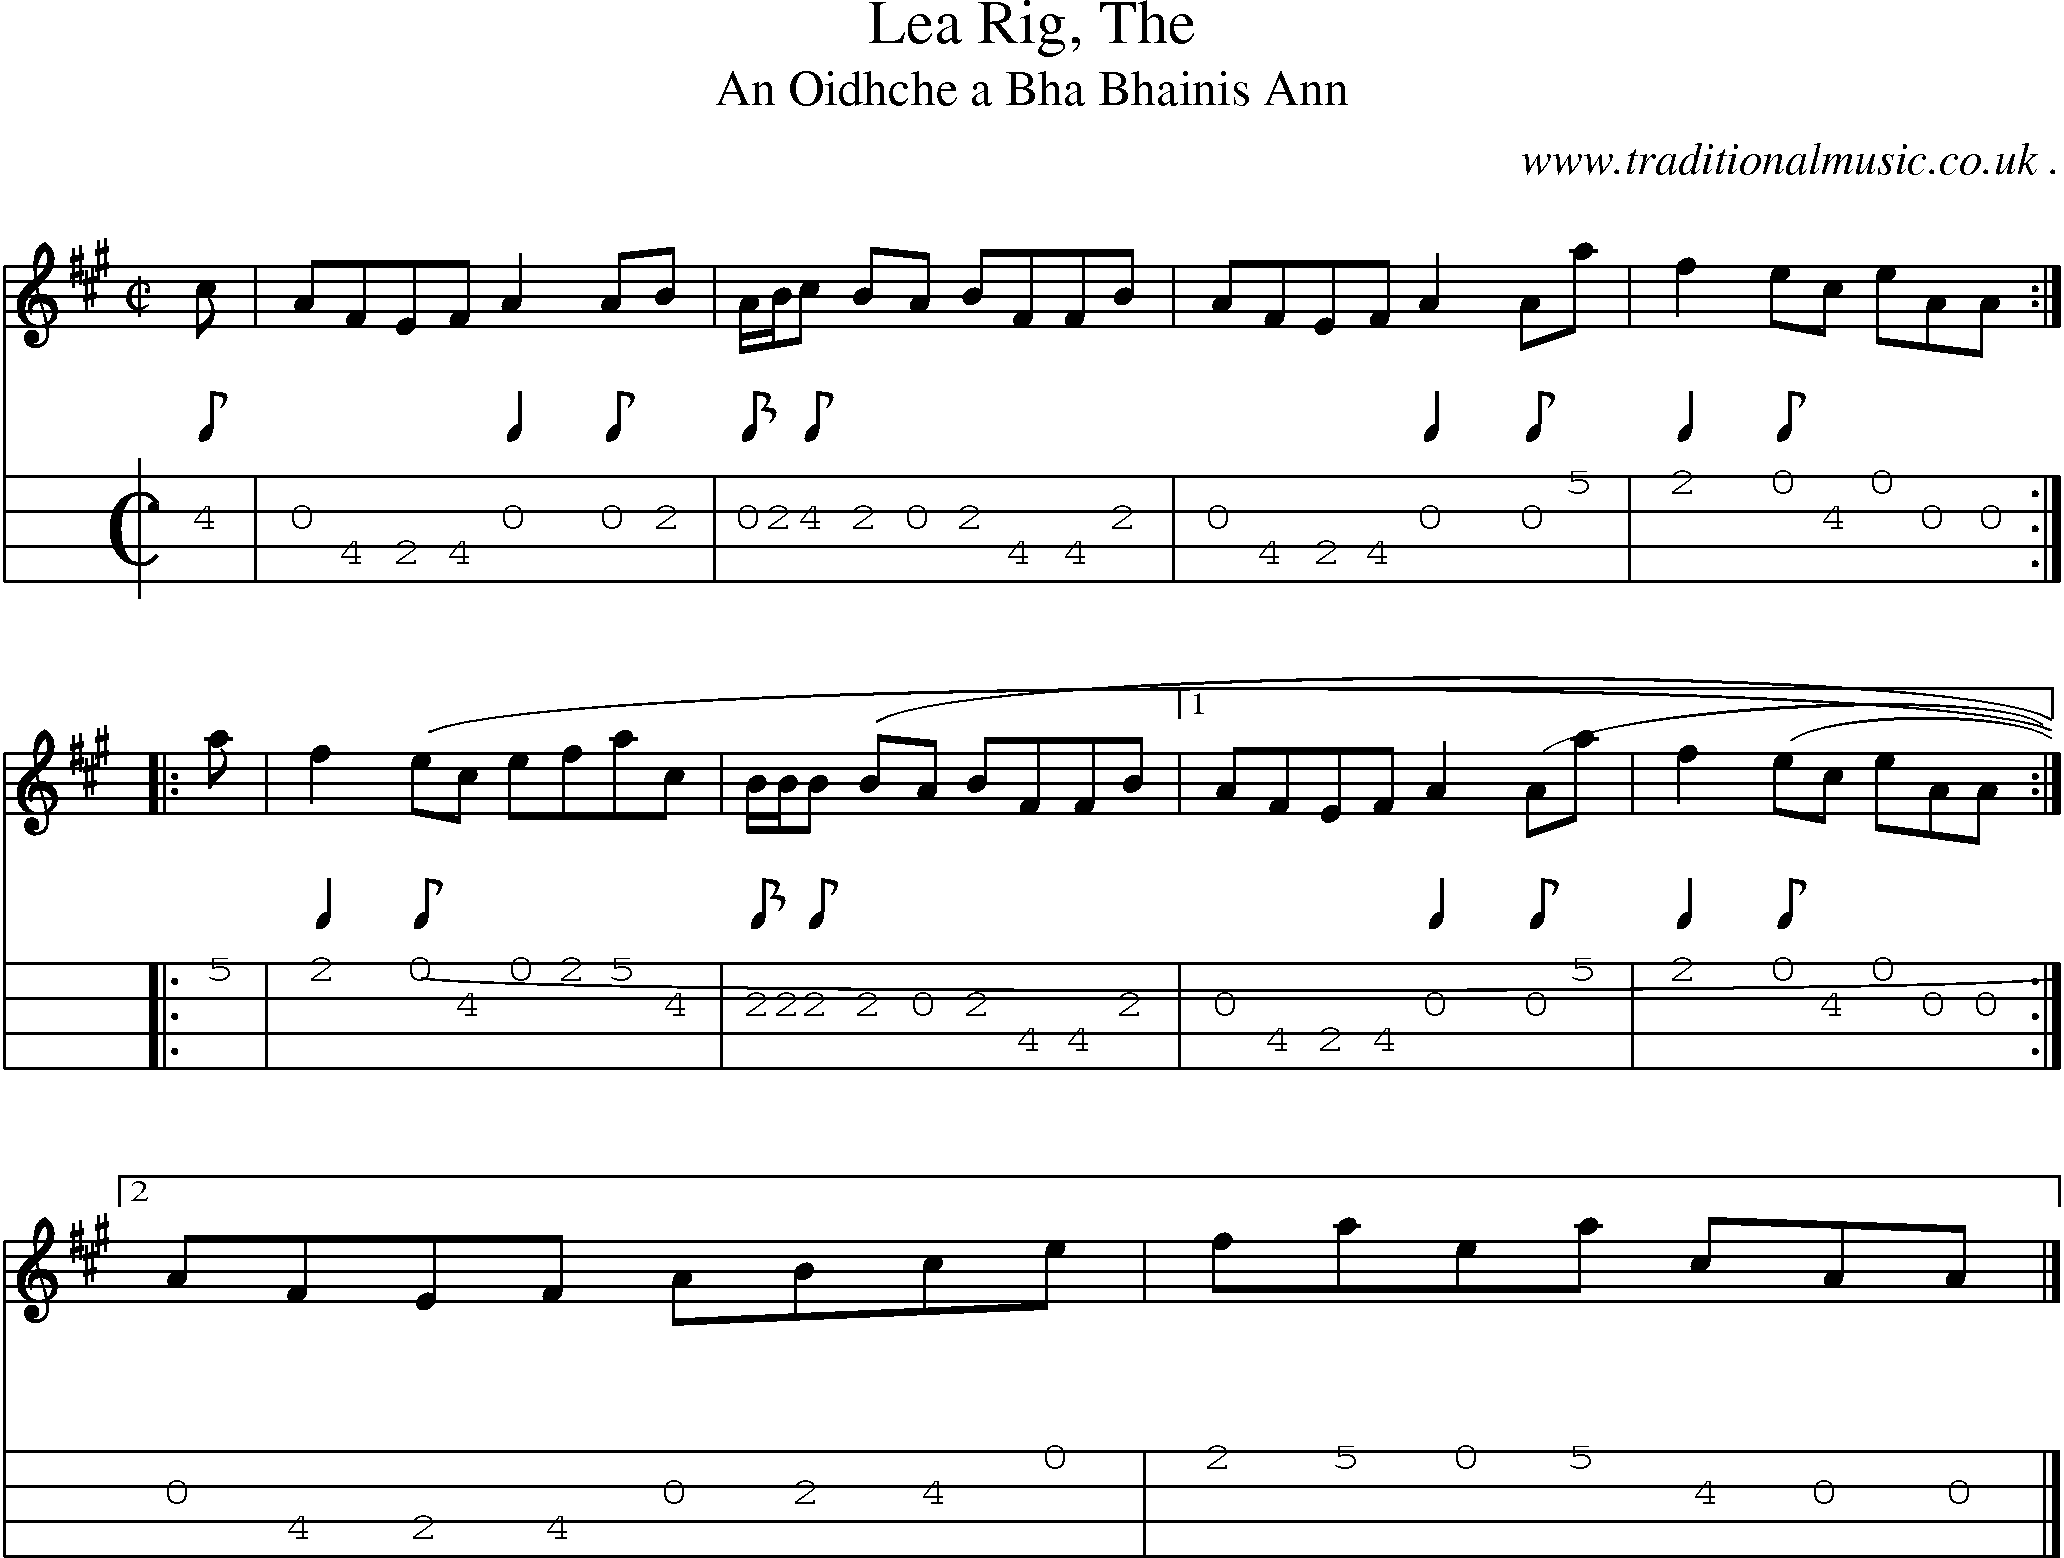 Sheet-music  score, Chords and Mandolin Tabs for Lea Rig The